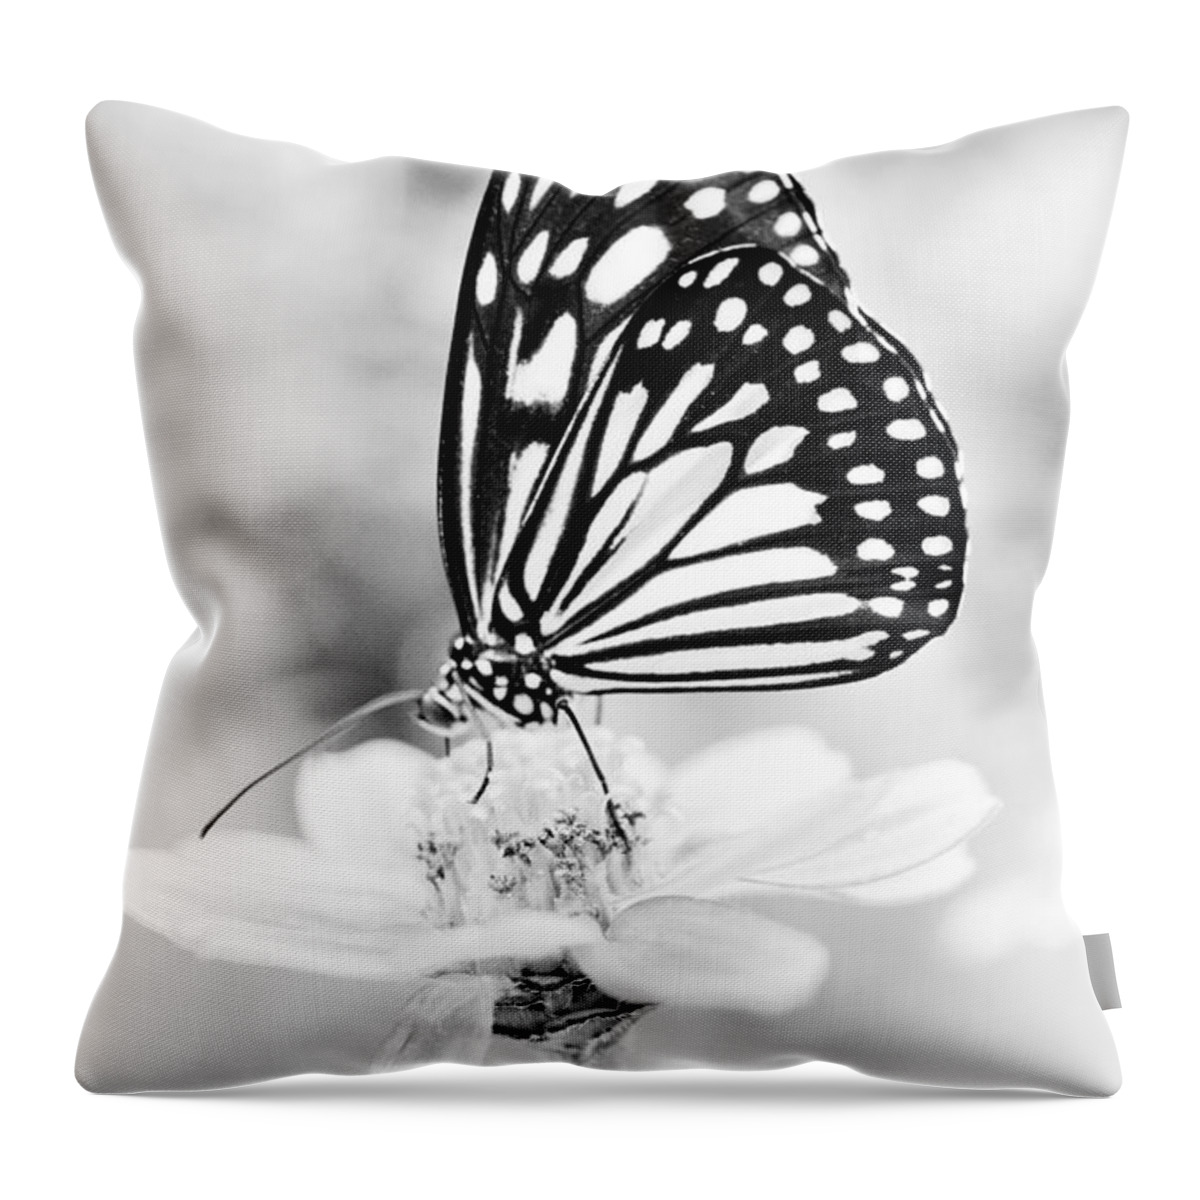 Butterfly Wings Throw Pillow featuring the photograph Butterfly Wings 7 - Black And White by Marianna Mills